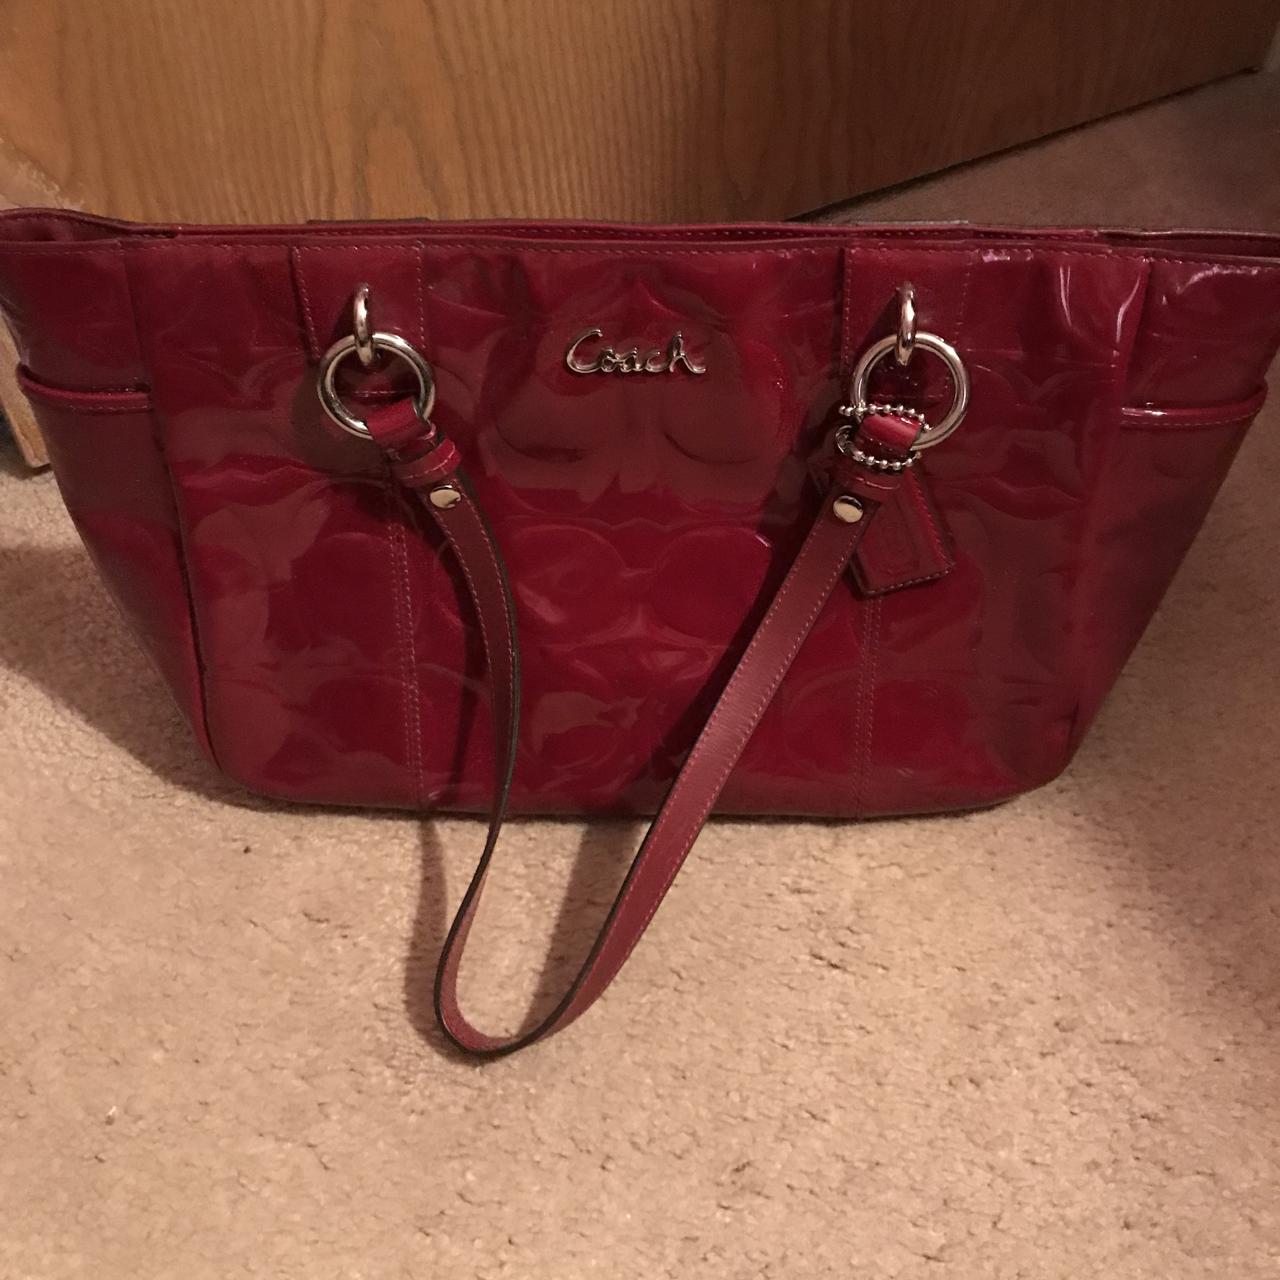 Coach | Bags | Used Red Coach Purse And Wallet As A Set | Poshmark